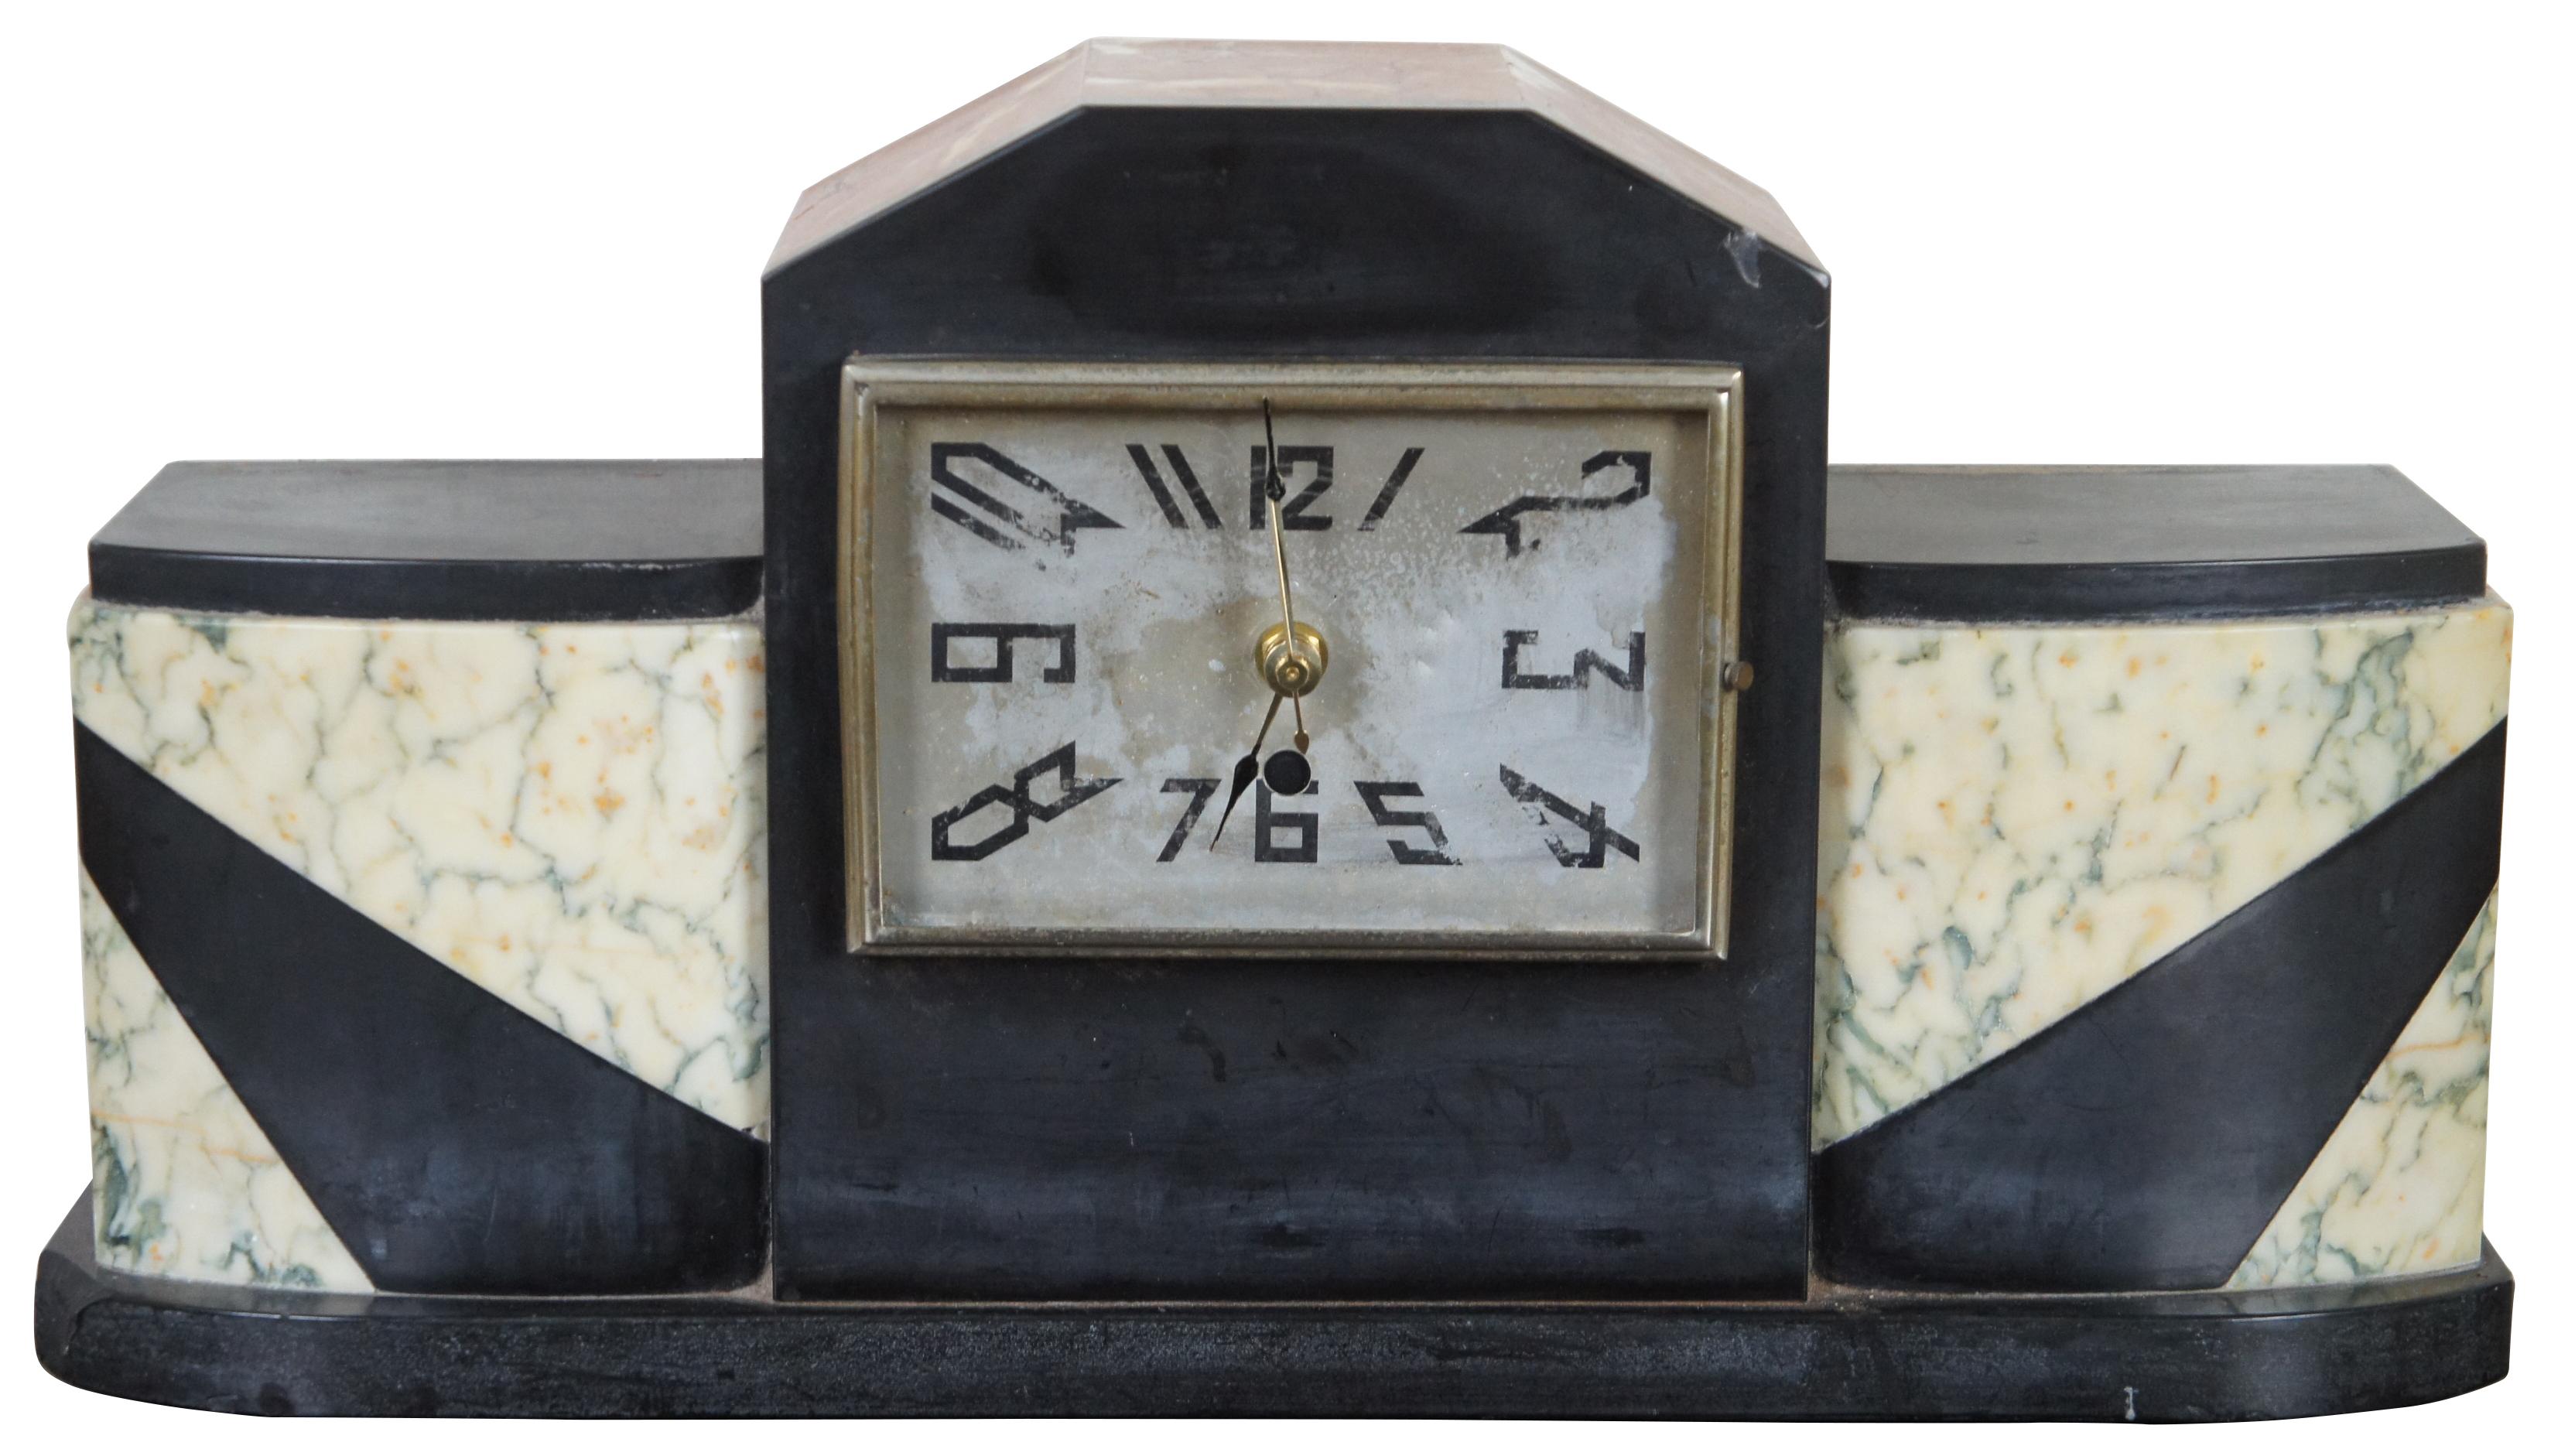 Three piece, black, white and salmon marble mantelpiece set, including an art deco clock and bookends.

Measures: Bookends - 6” x 3.5” x 7” / Clock - 18” x 4.75” x 9.5” (Width x depth x height).